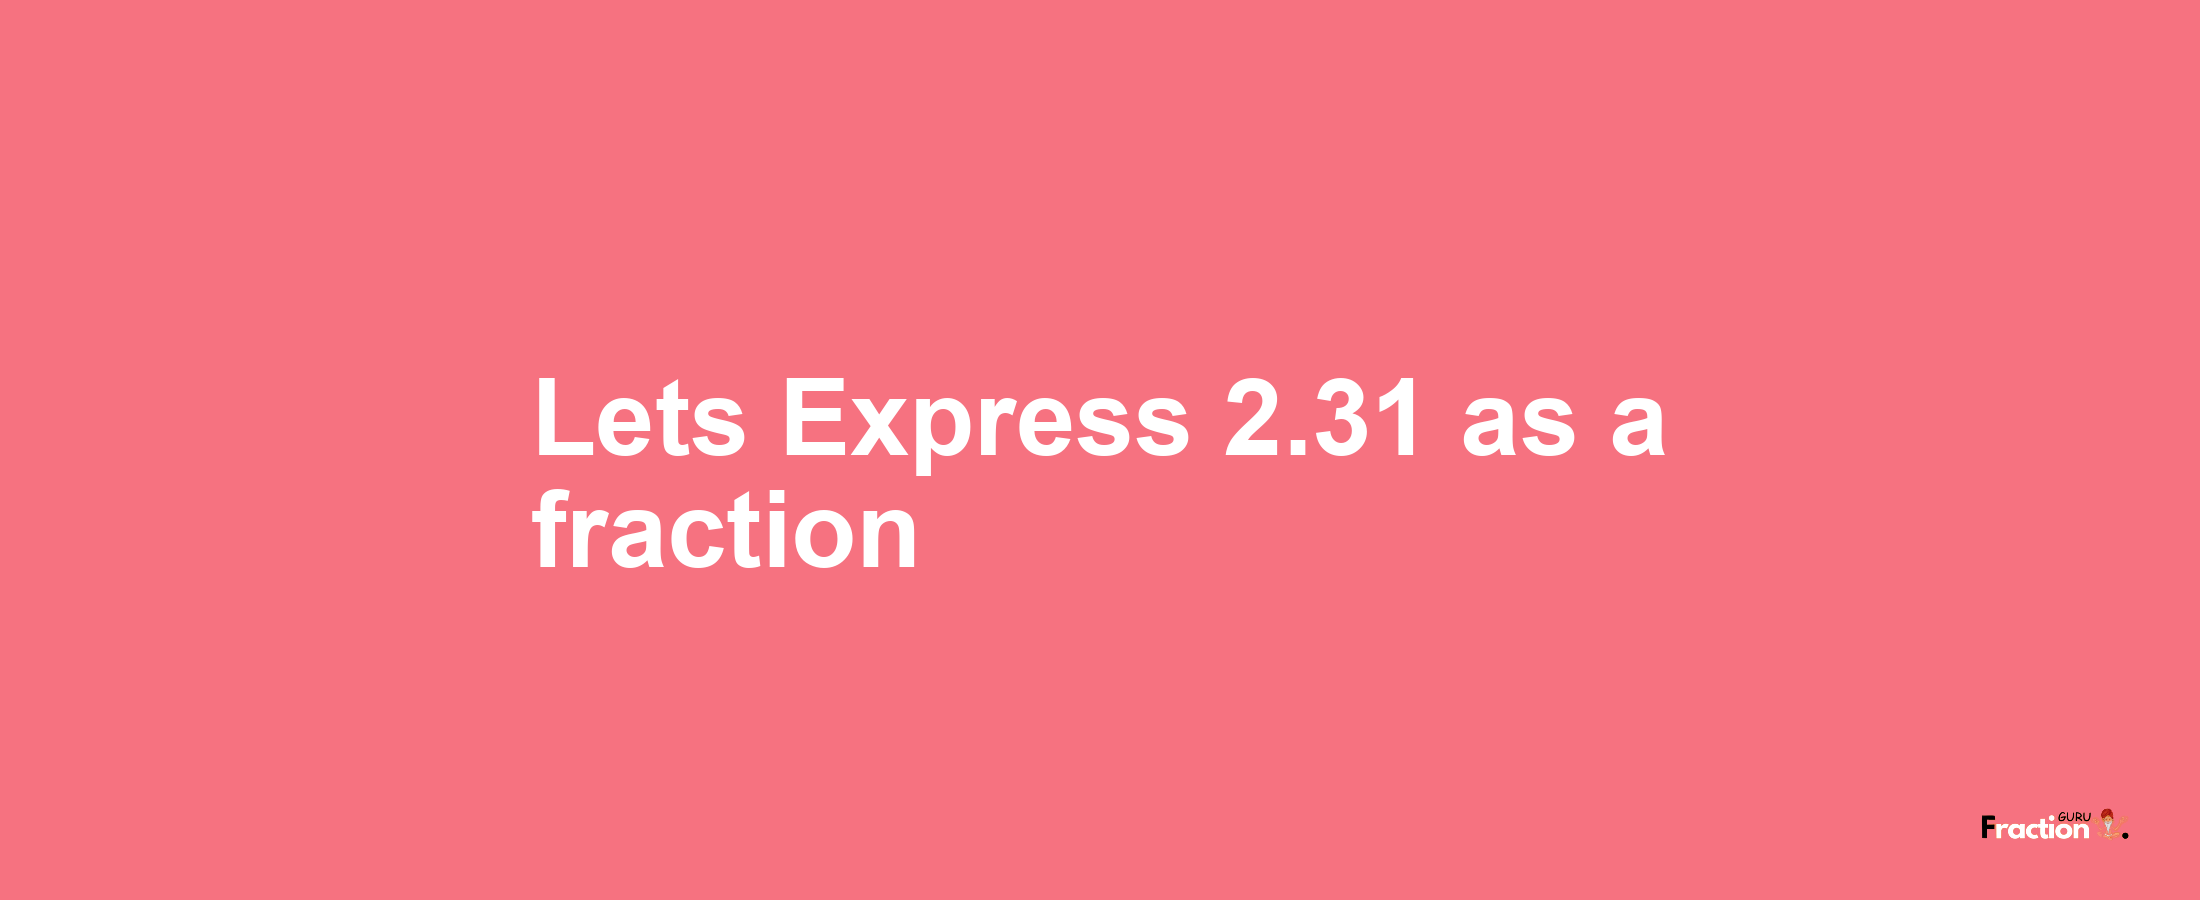 Lets Express 2.31 as afraction